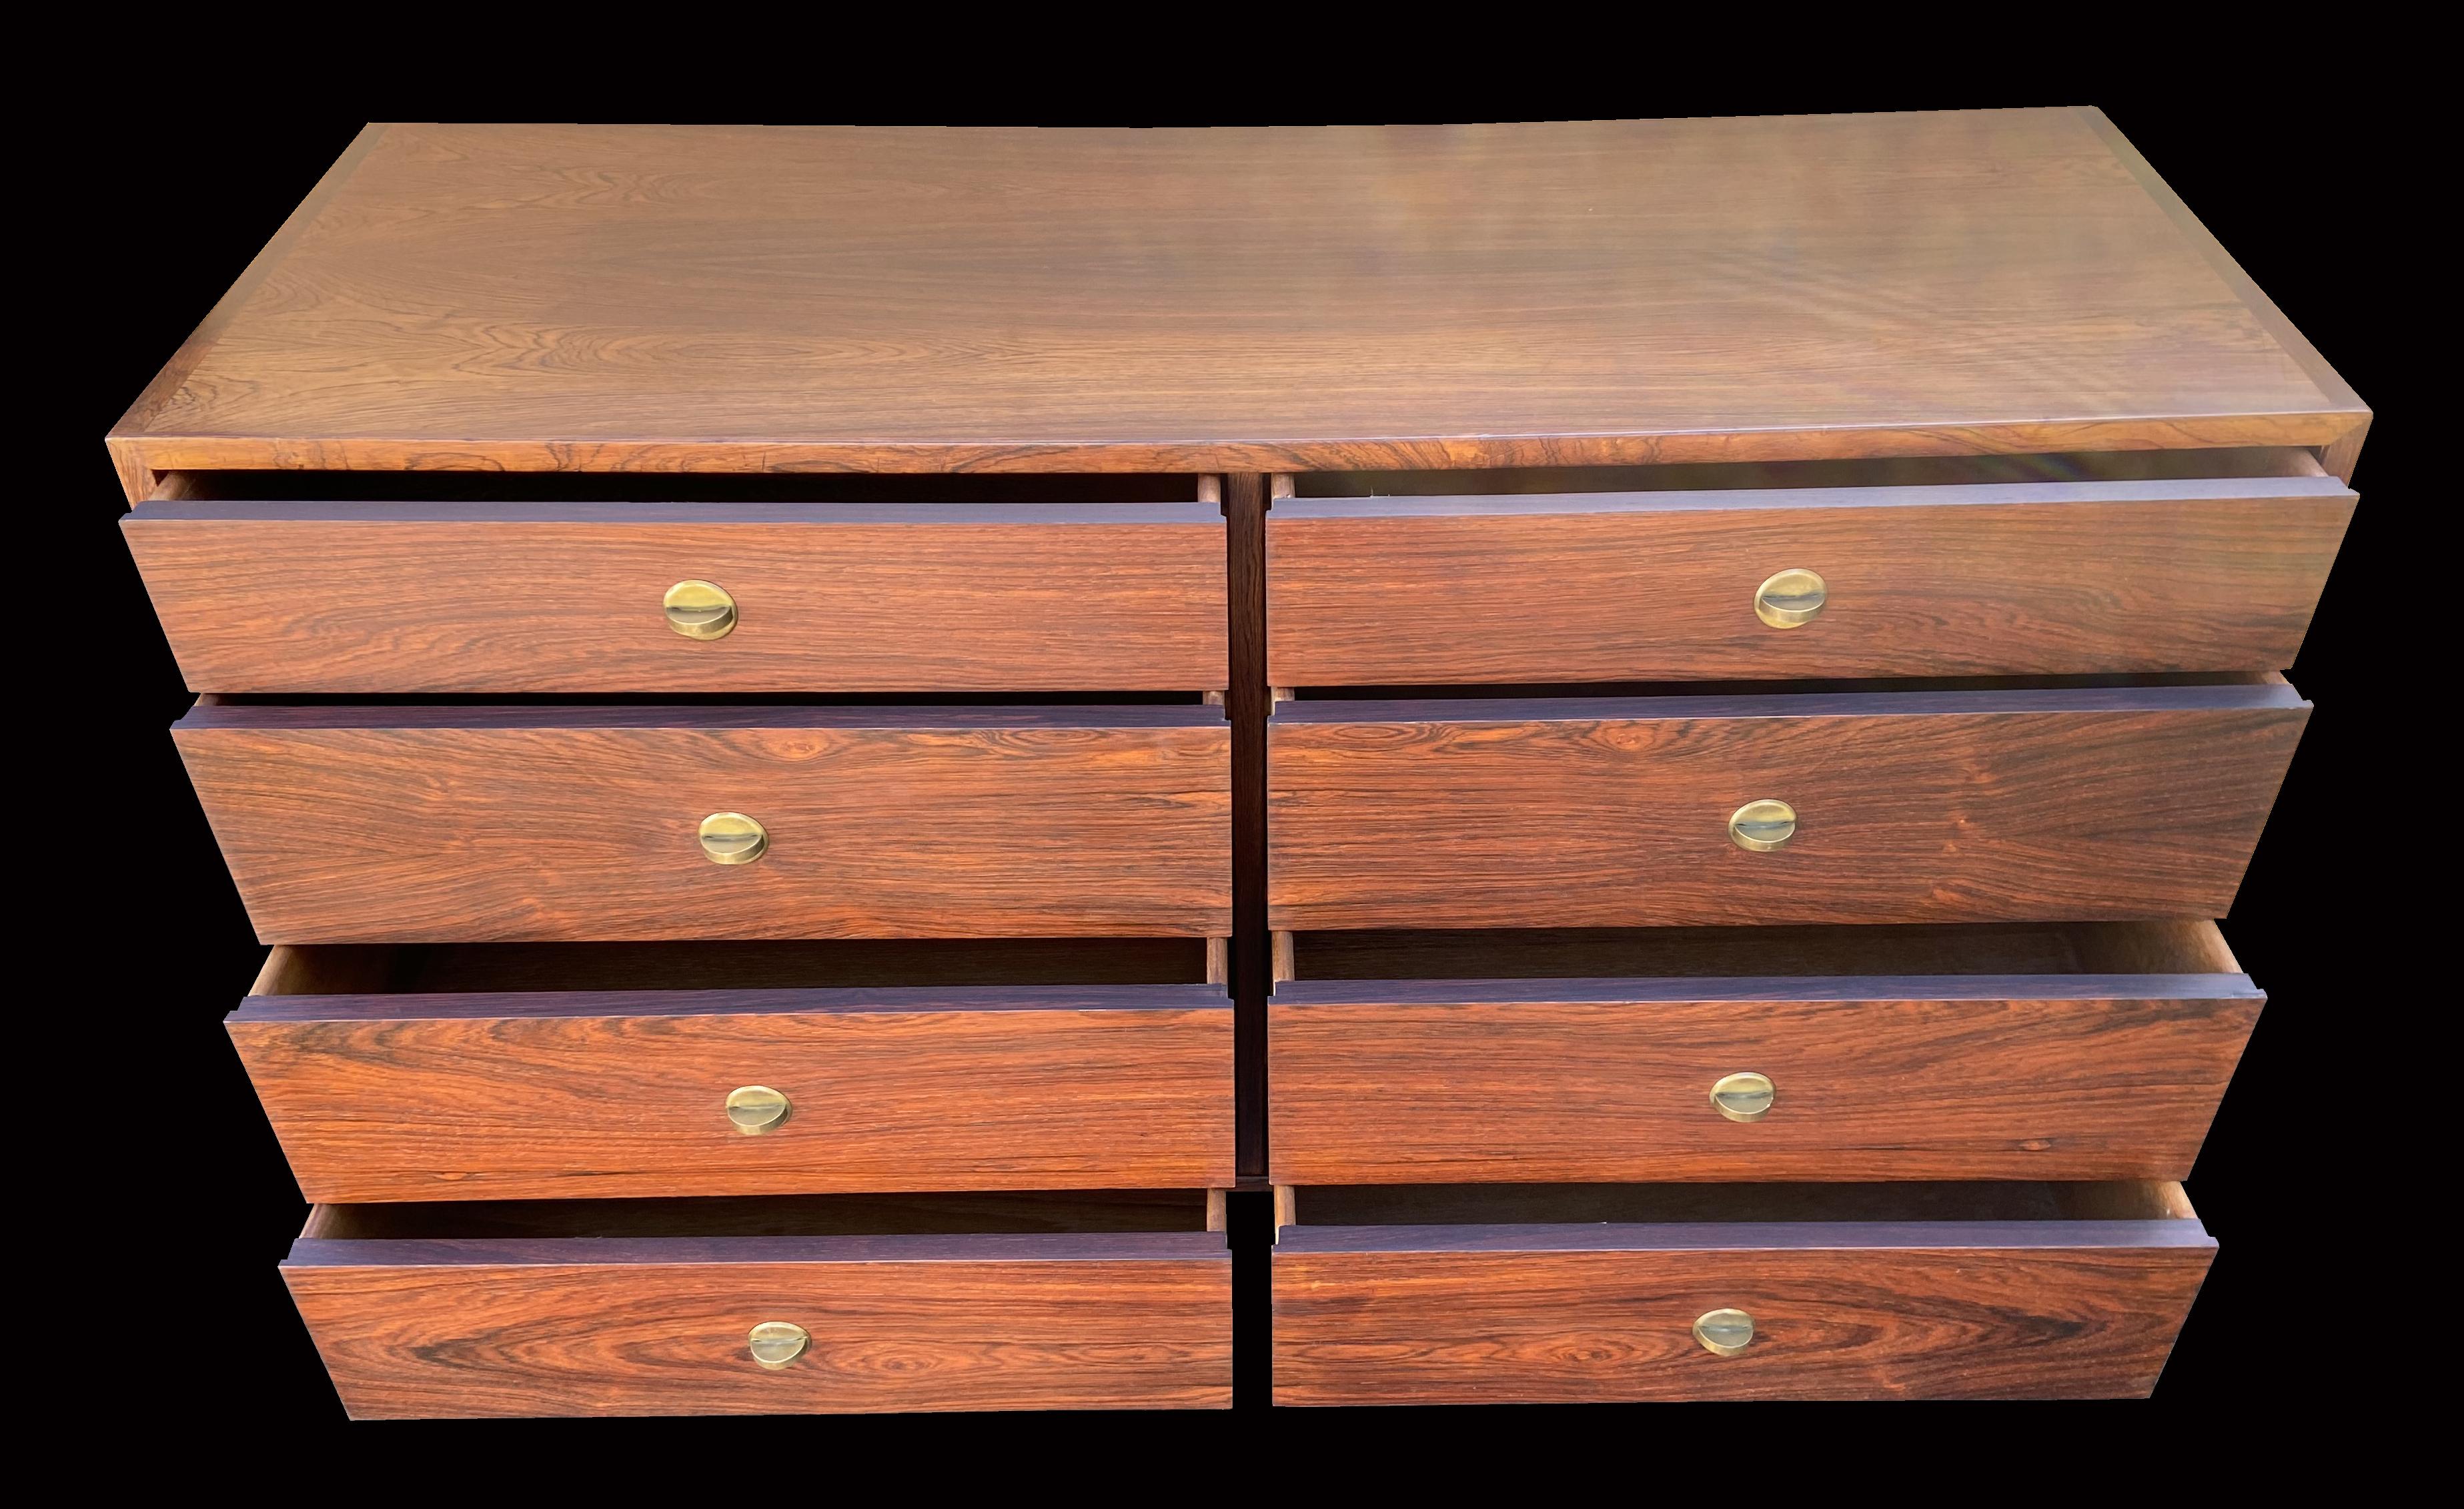 A very useful stylish chest, 8 quite large drawers, each with a single little brass knob handle, and all in very nice original condition.
This item is made from Santos Rosewood or Pau Ferro, latin name Machaerium Scleroxylon, and is not included on